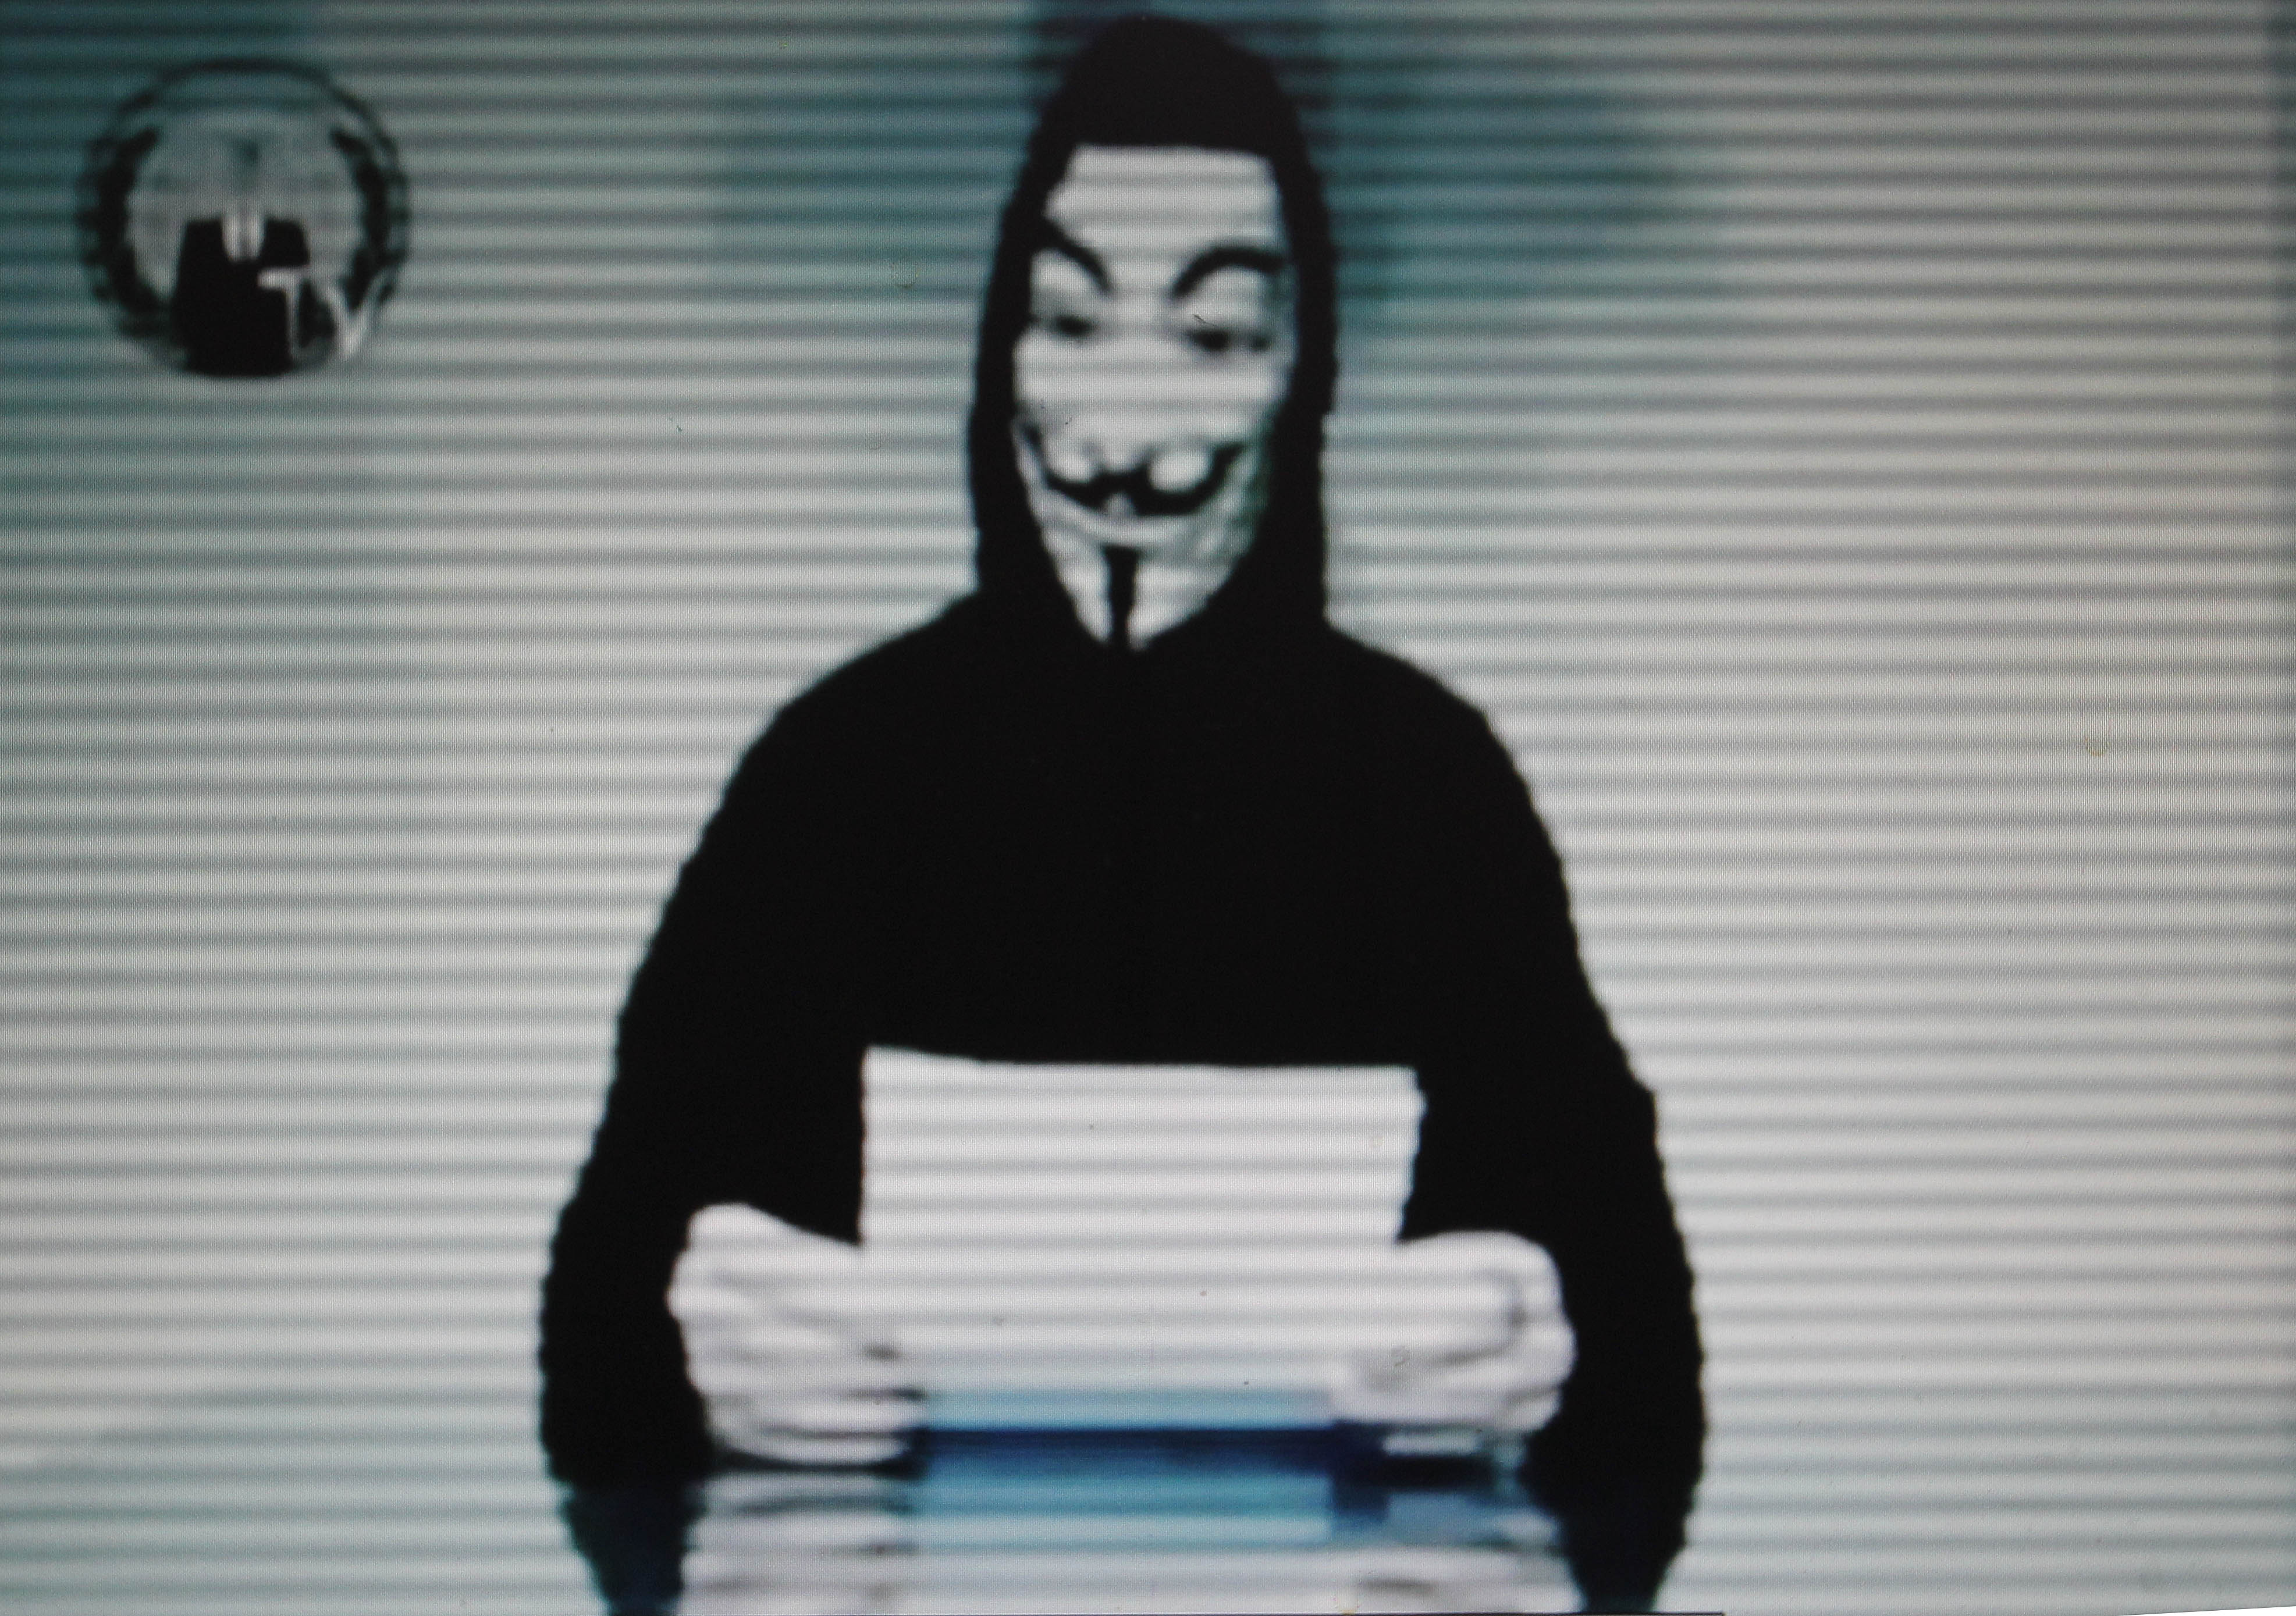 Anonymous, Attack, Hackare, Dataintrång